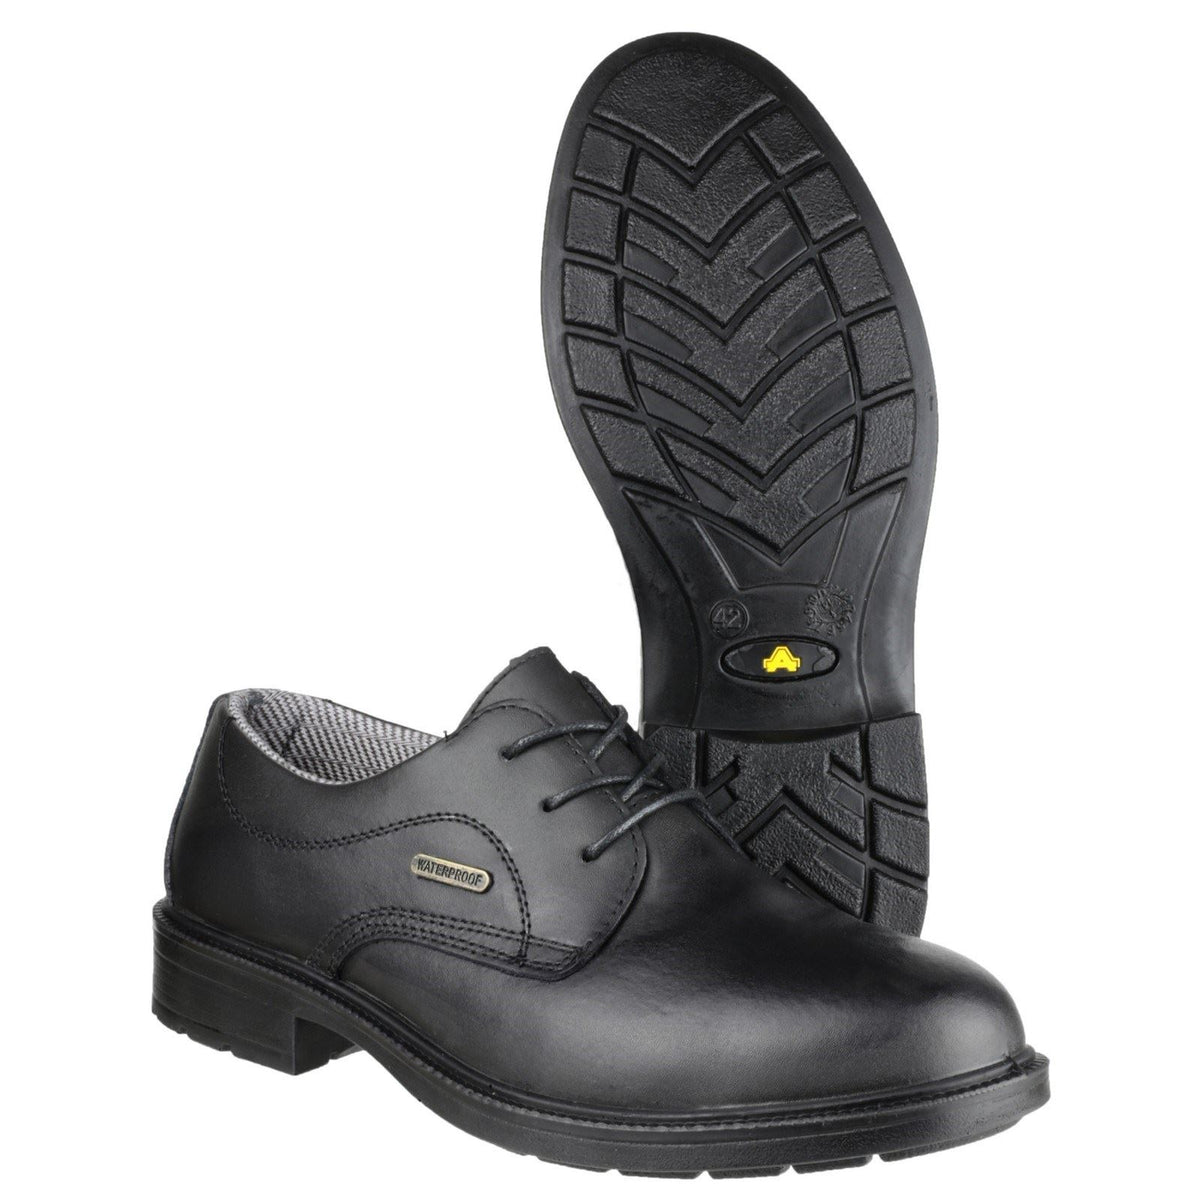 Amblers Safety FS62 Gibson Safety Shoes